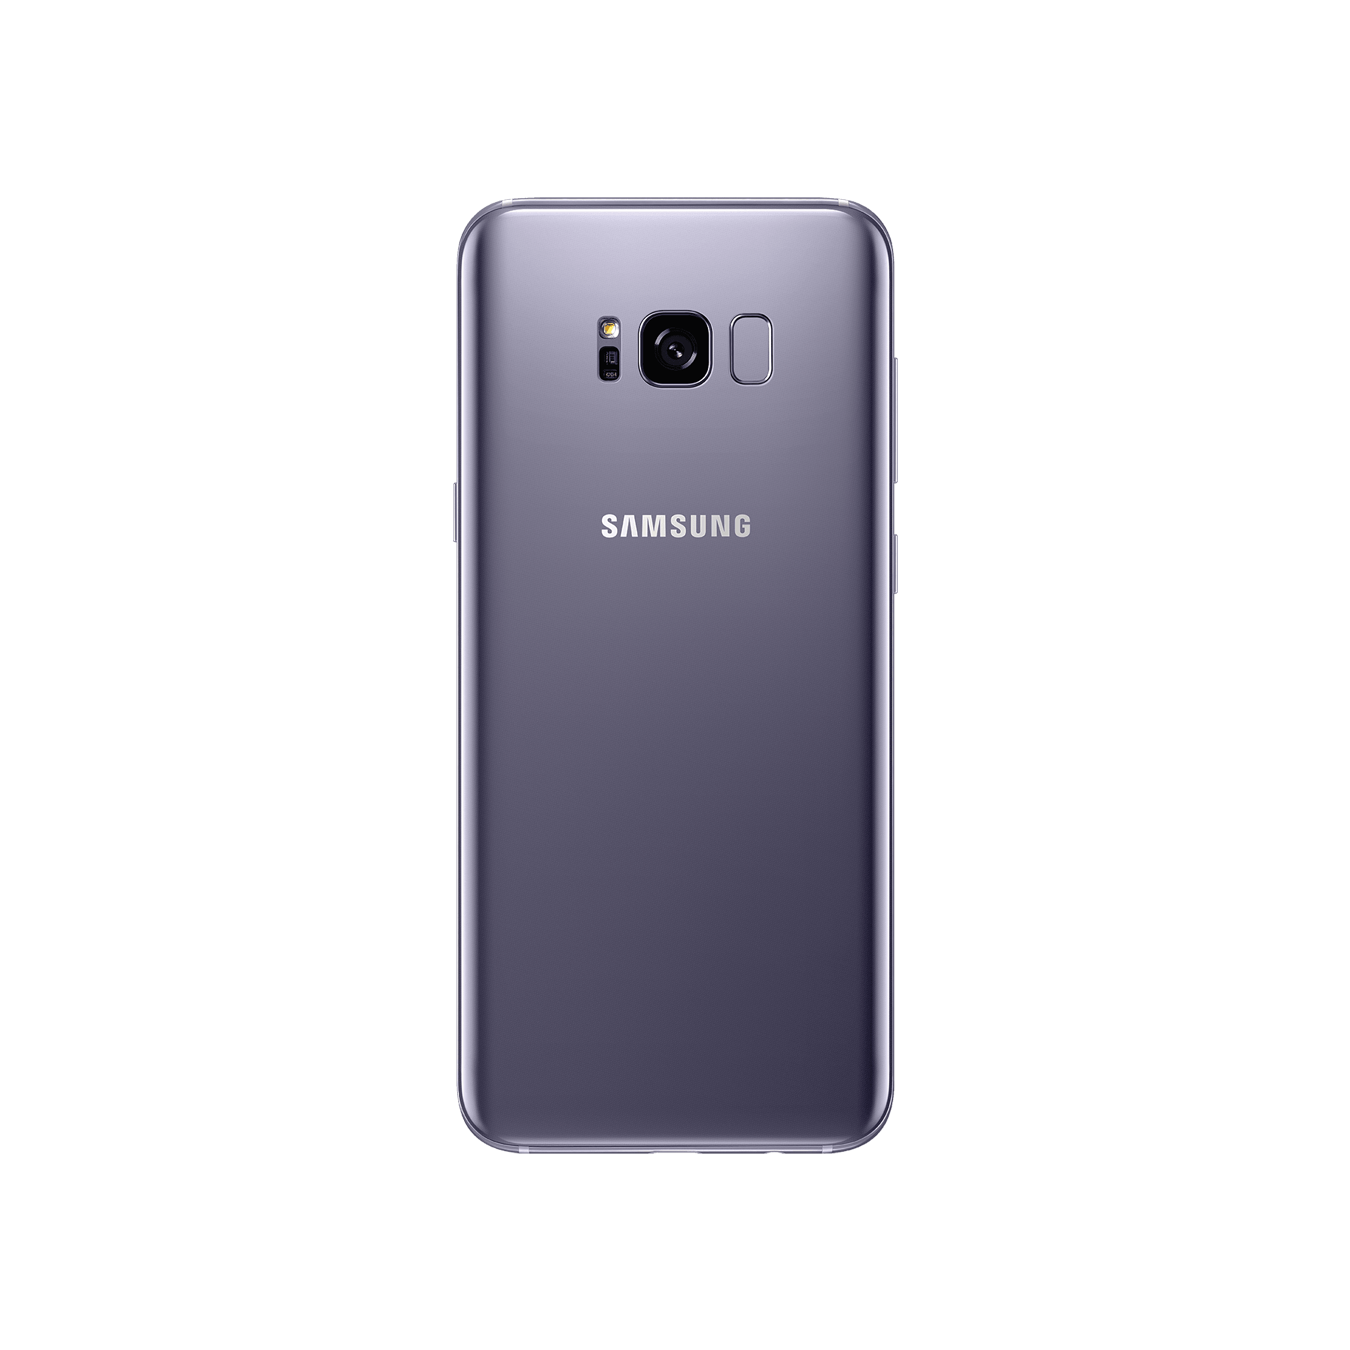 Samsung Galaxy S8 & S8 Plus IMEI repair service to fix bad or blacklisted IMEI, ensuring full functionality and connectivity, available at cleanimei.com